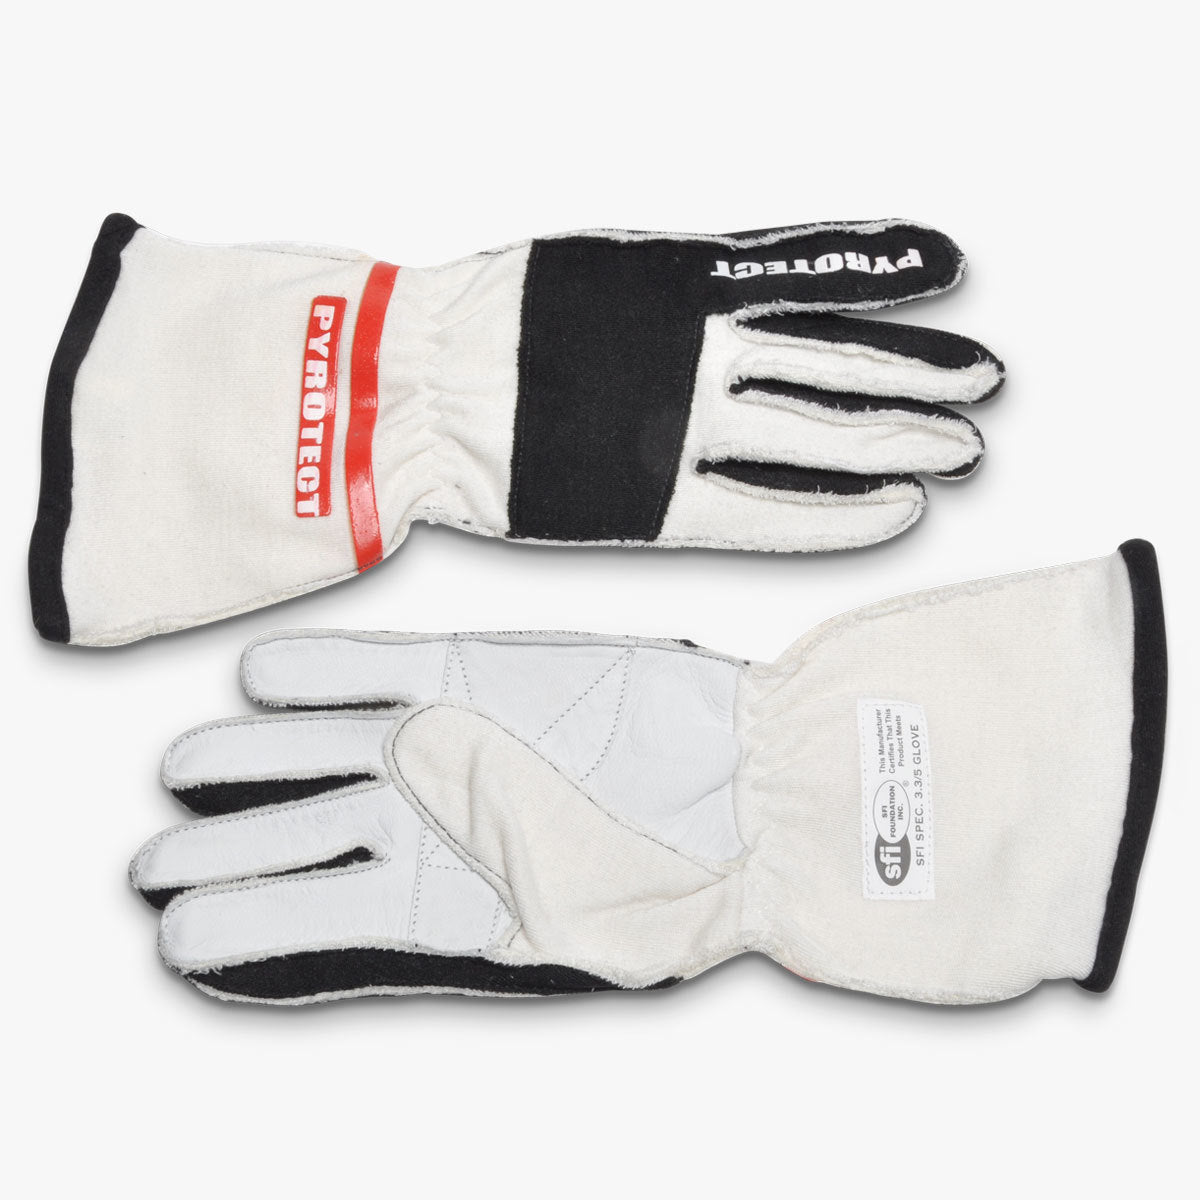 Pyrotect Glove PRO 2 Layer White X-Large SFI-5 Safety Clothing Driving Gloves main image